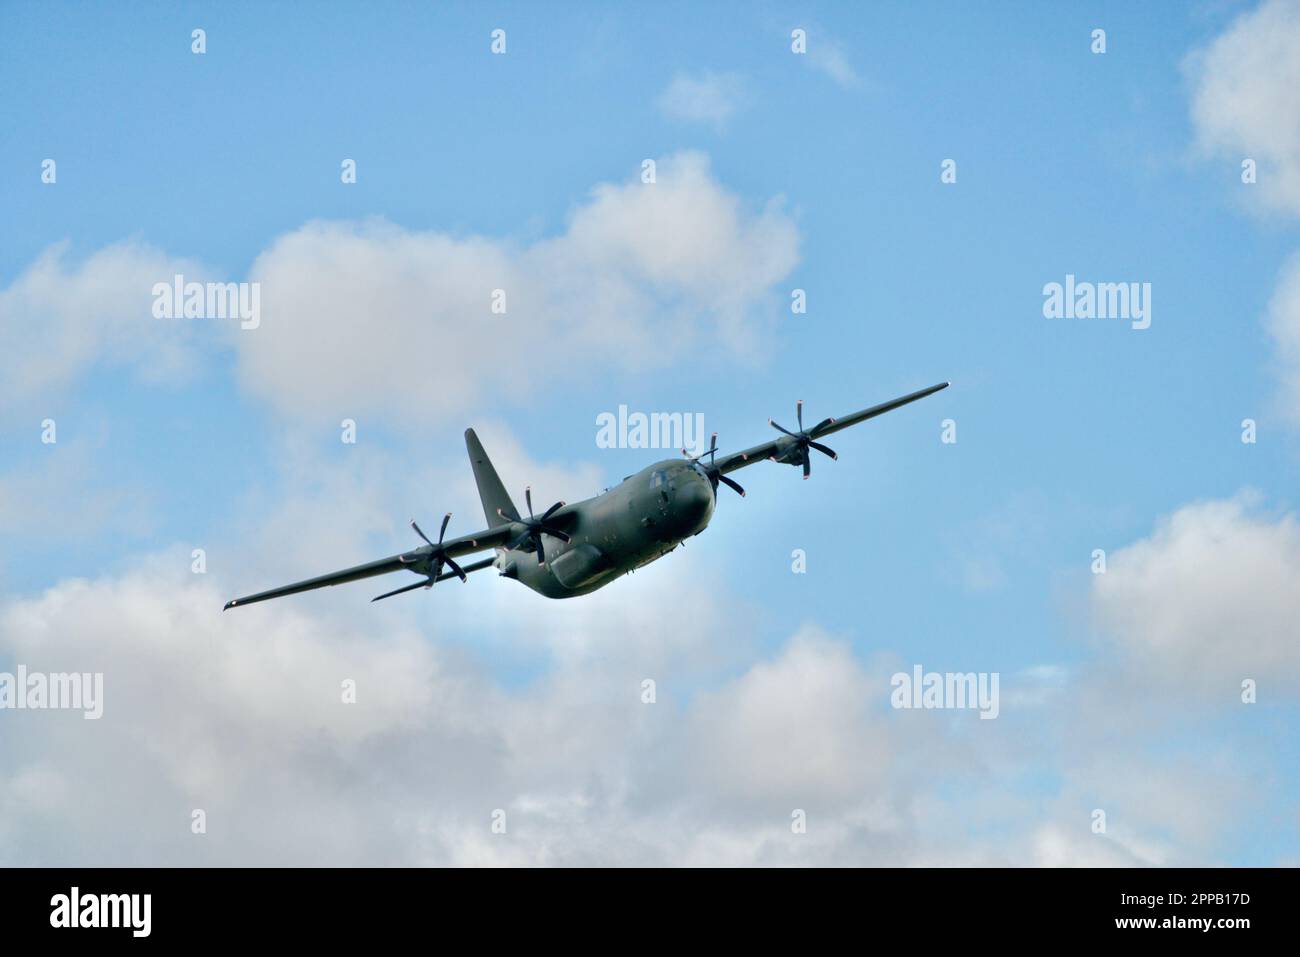 The picture is of a C-130 Hercules at the Mach Loop in north Wales where the aircraft fly in the valleys, thus enabling to get good photos. Stock Photo